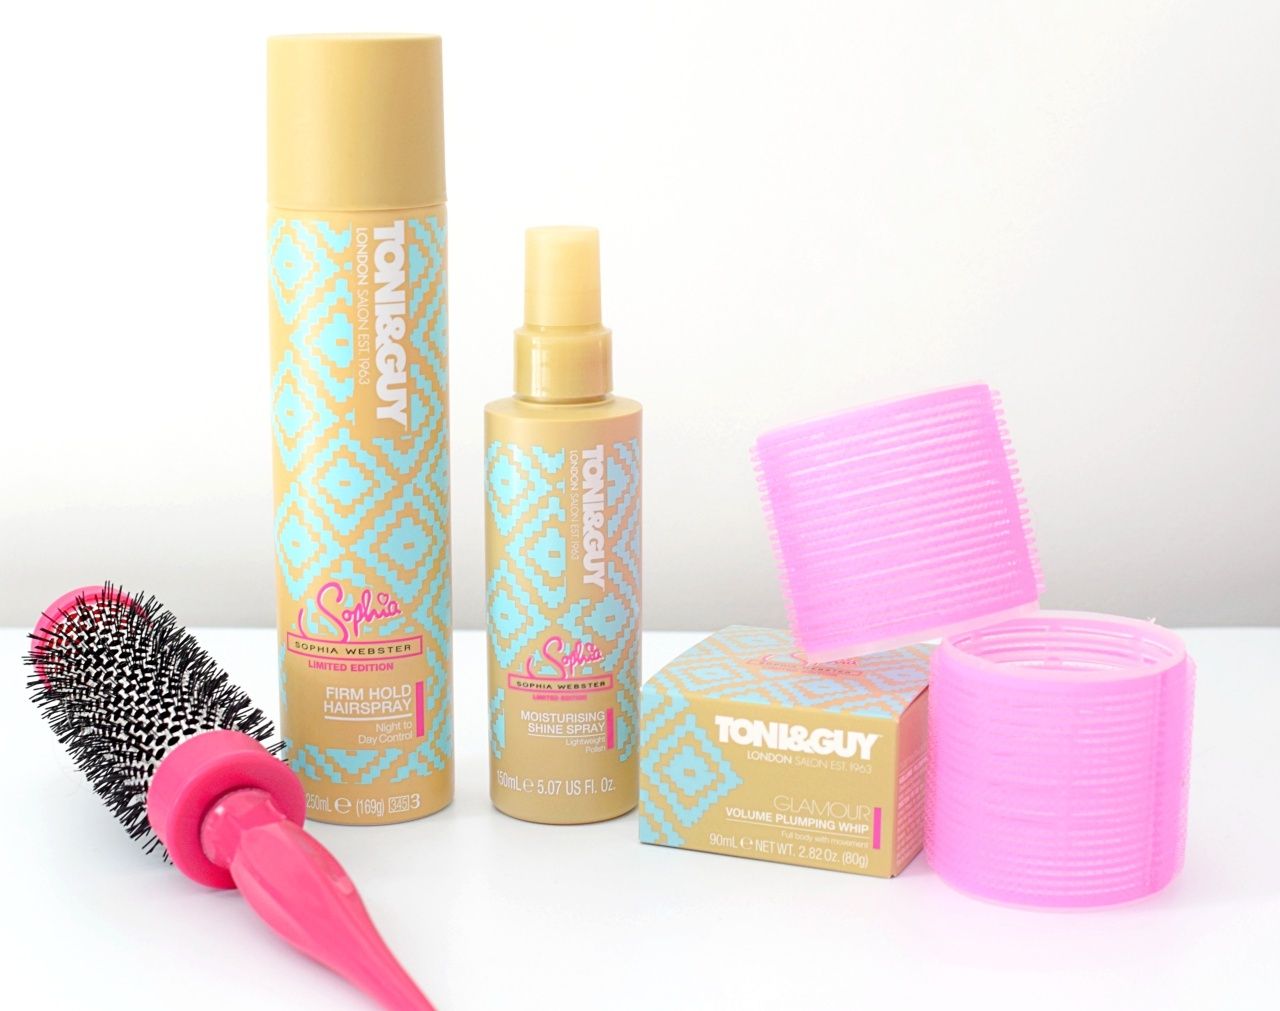 Toni & Guy Sophia Webster Products Collaboration